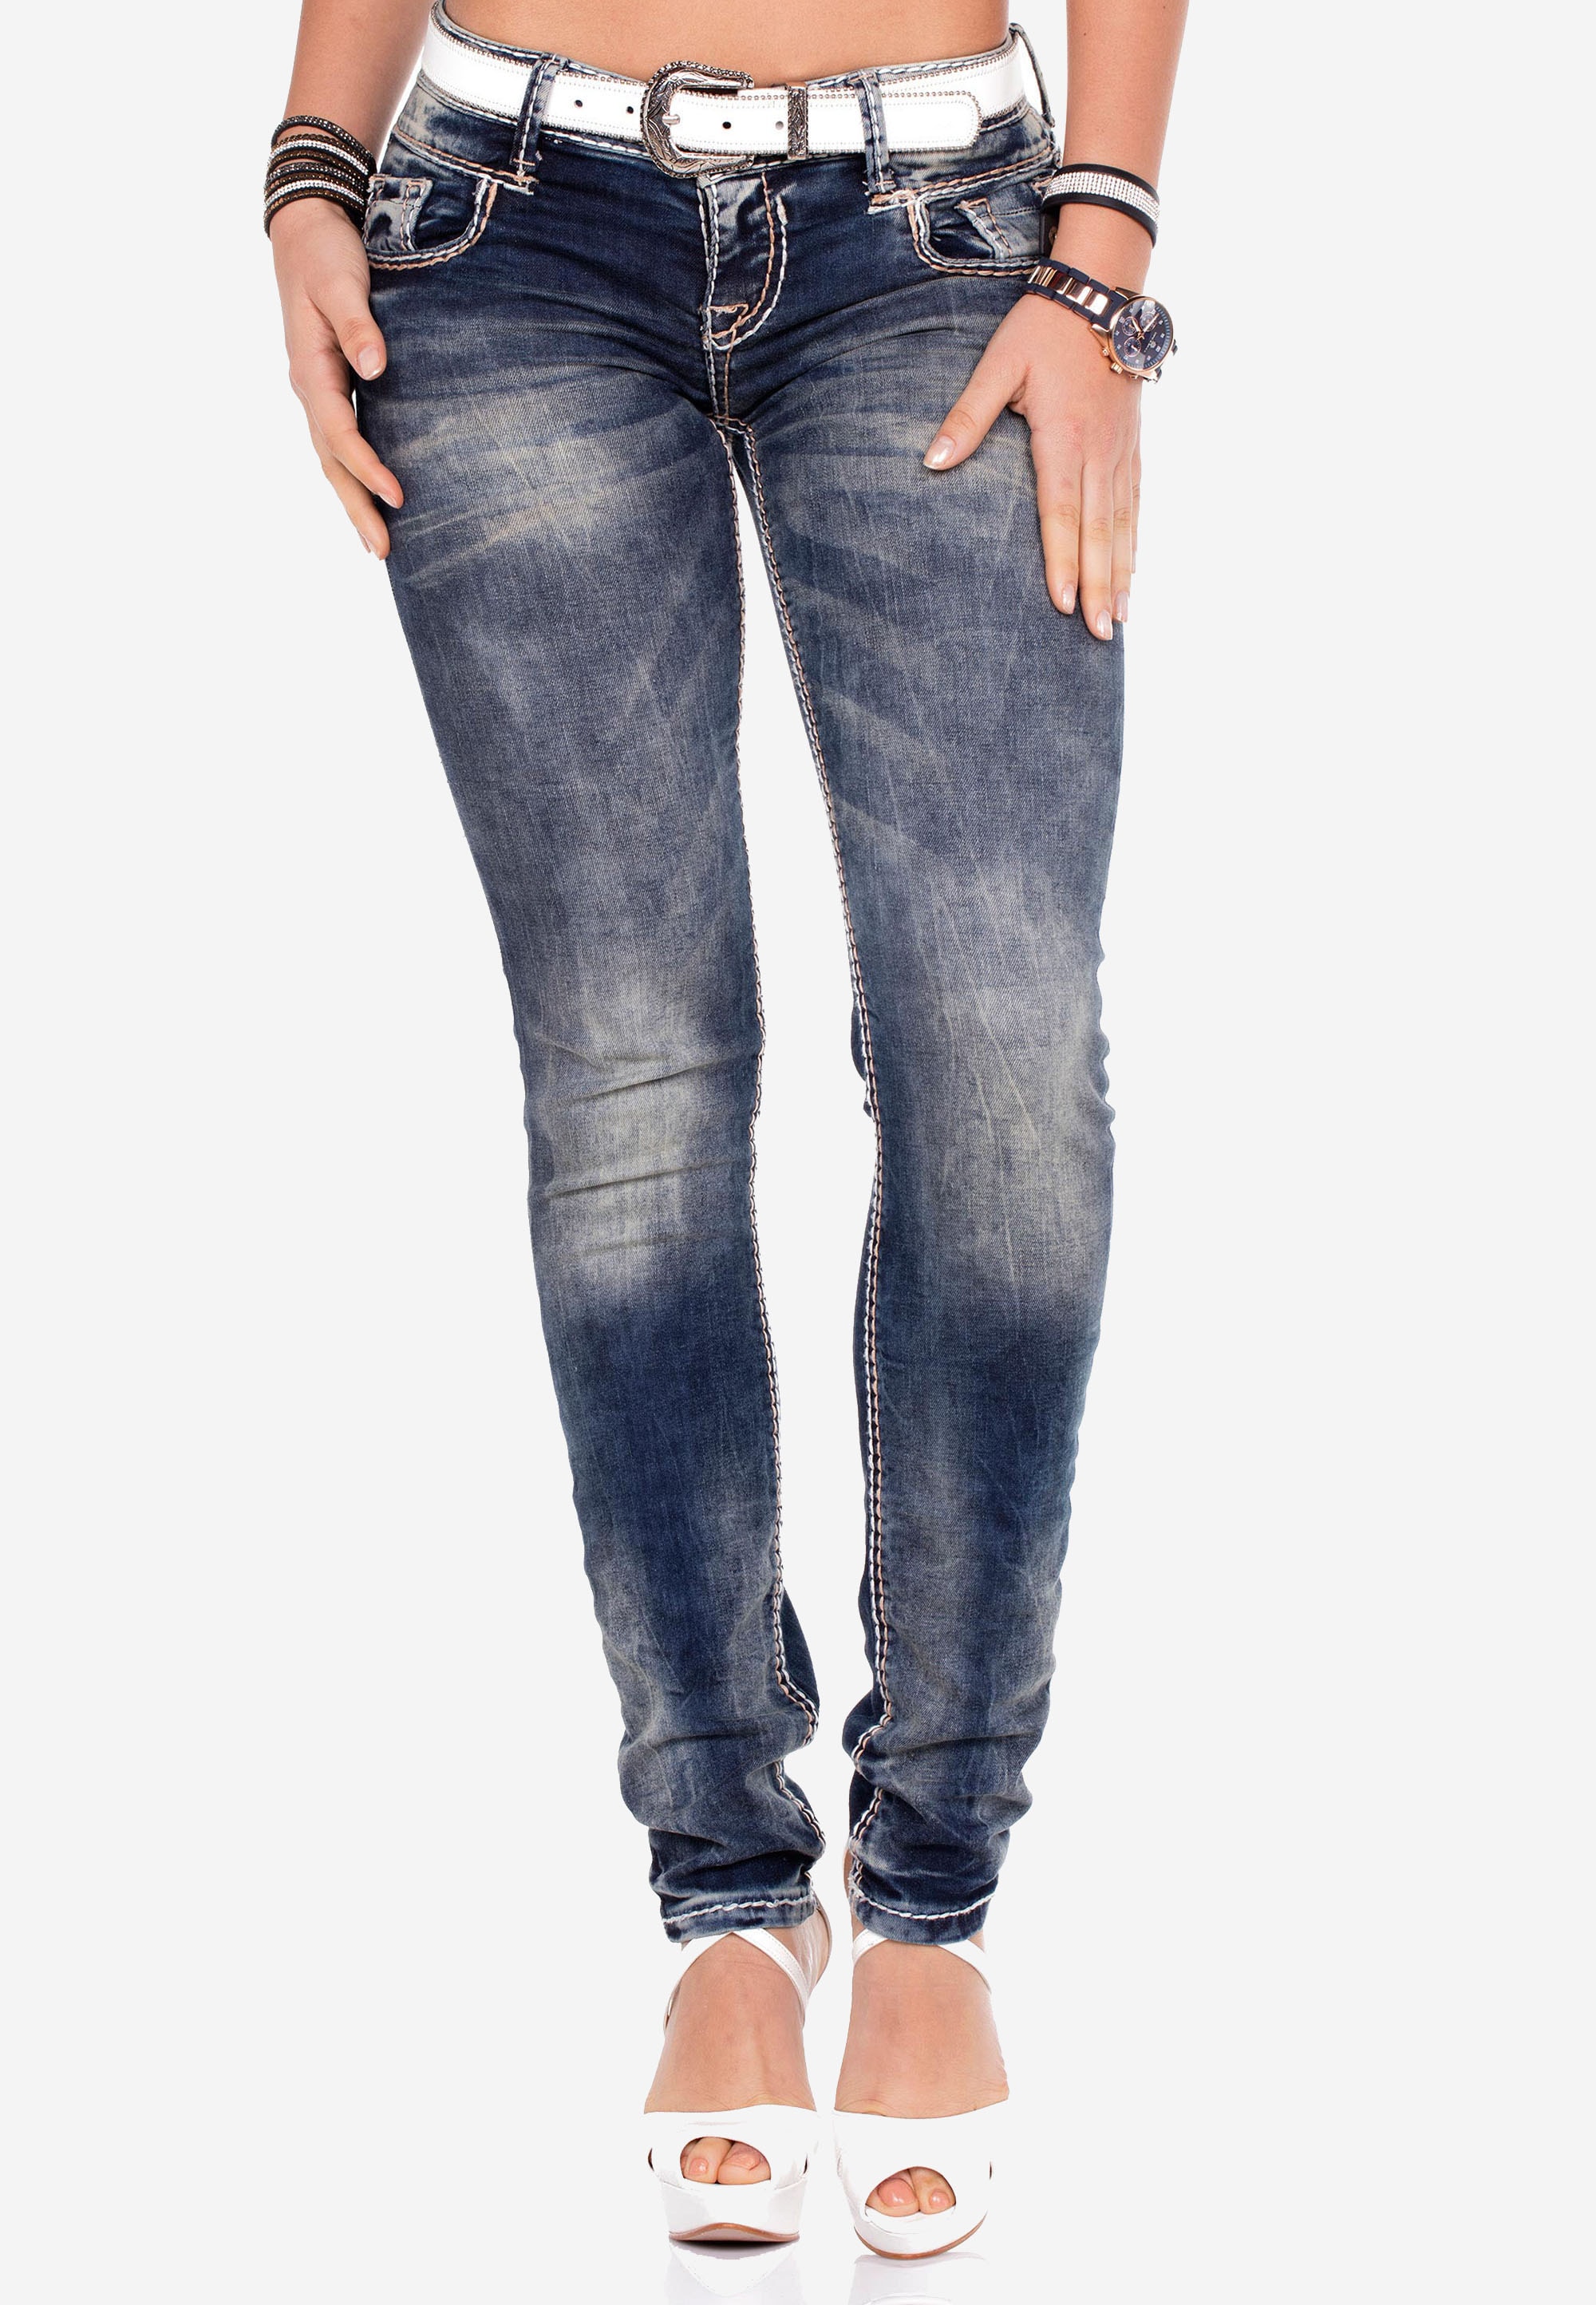 Cipo & Baxx Slim-fit-Jeans, mit niedriger Taille in Straight Fit